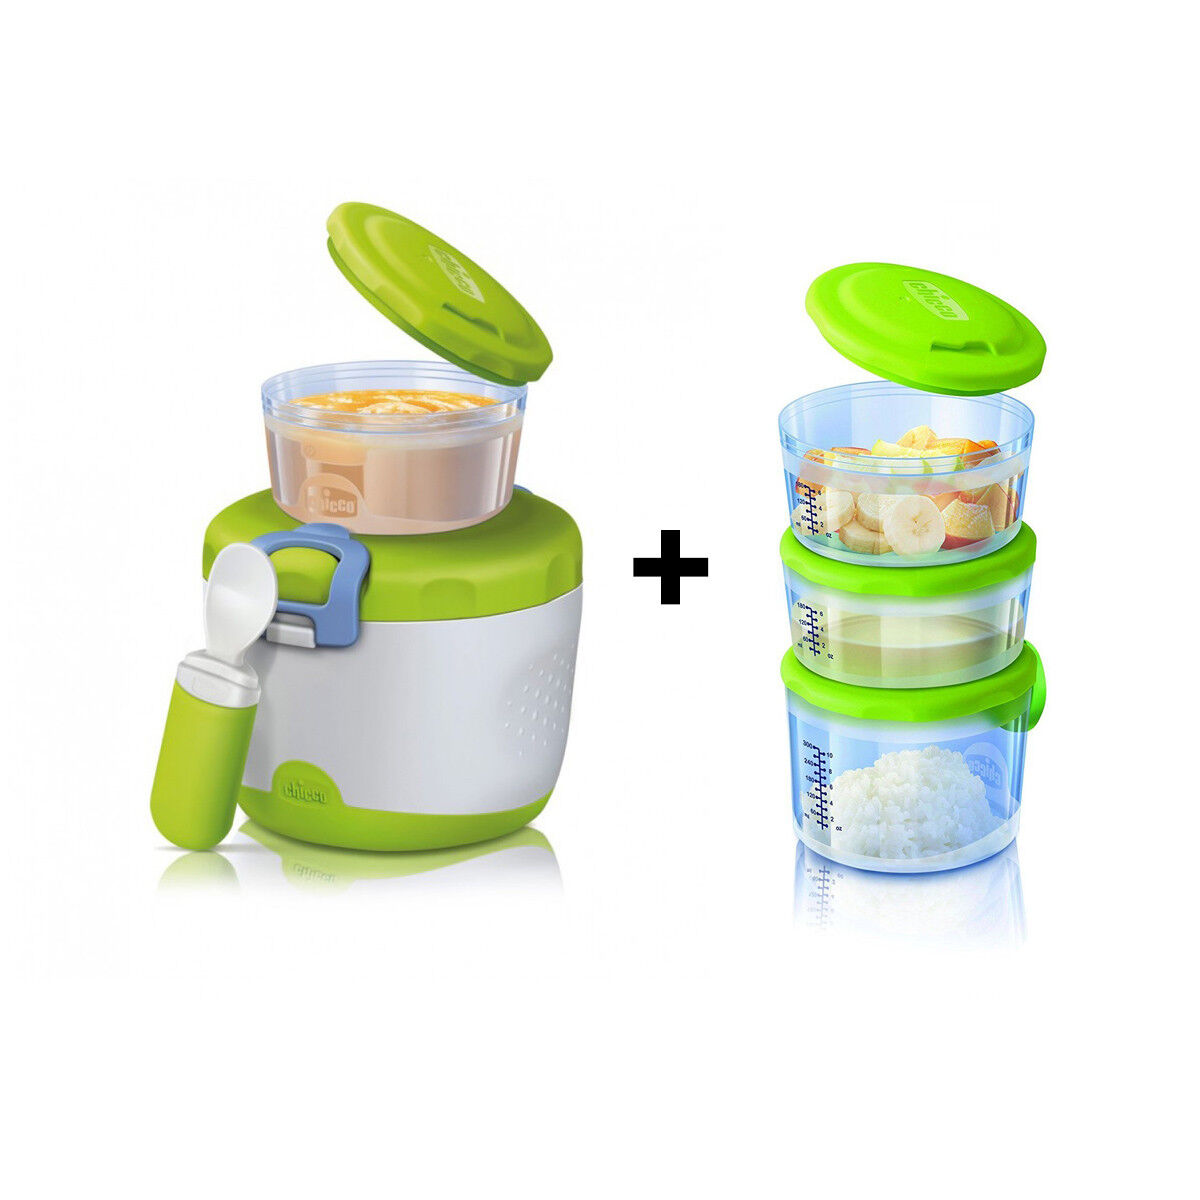 CHICCO Easy Meal Thermos Portapappa System 6m + 4 Contenitori Varie misure